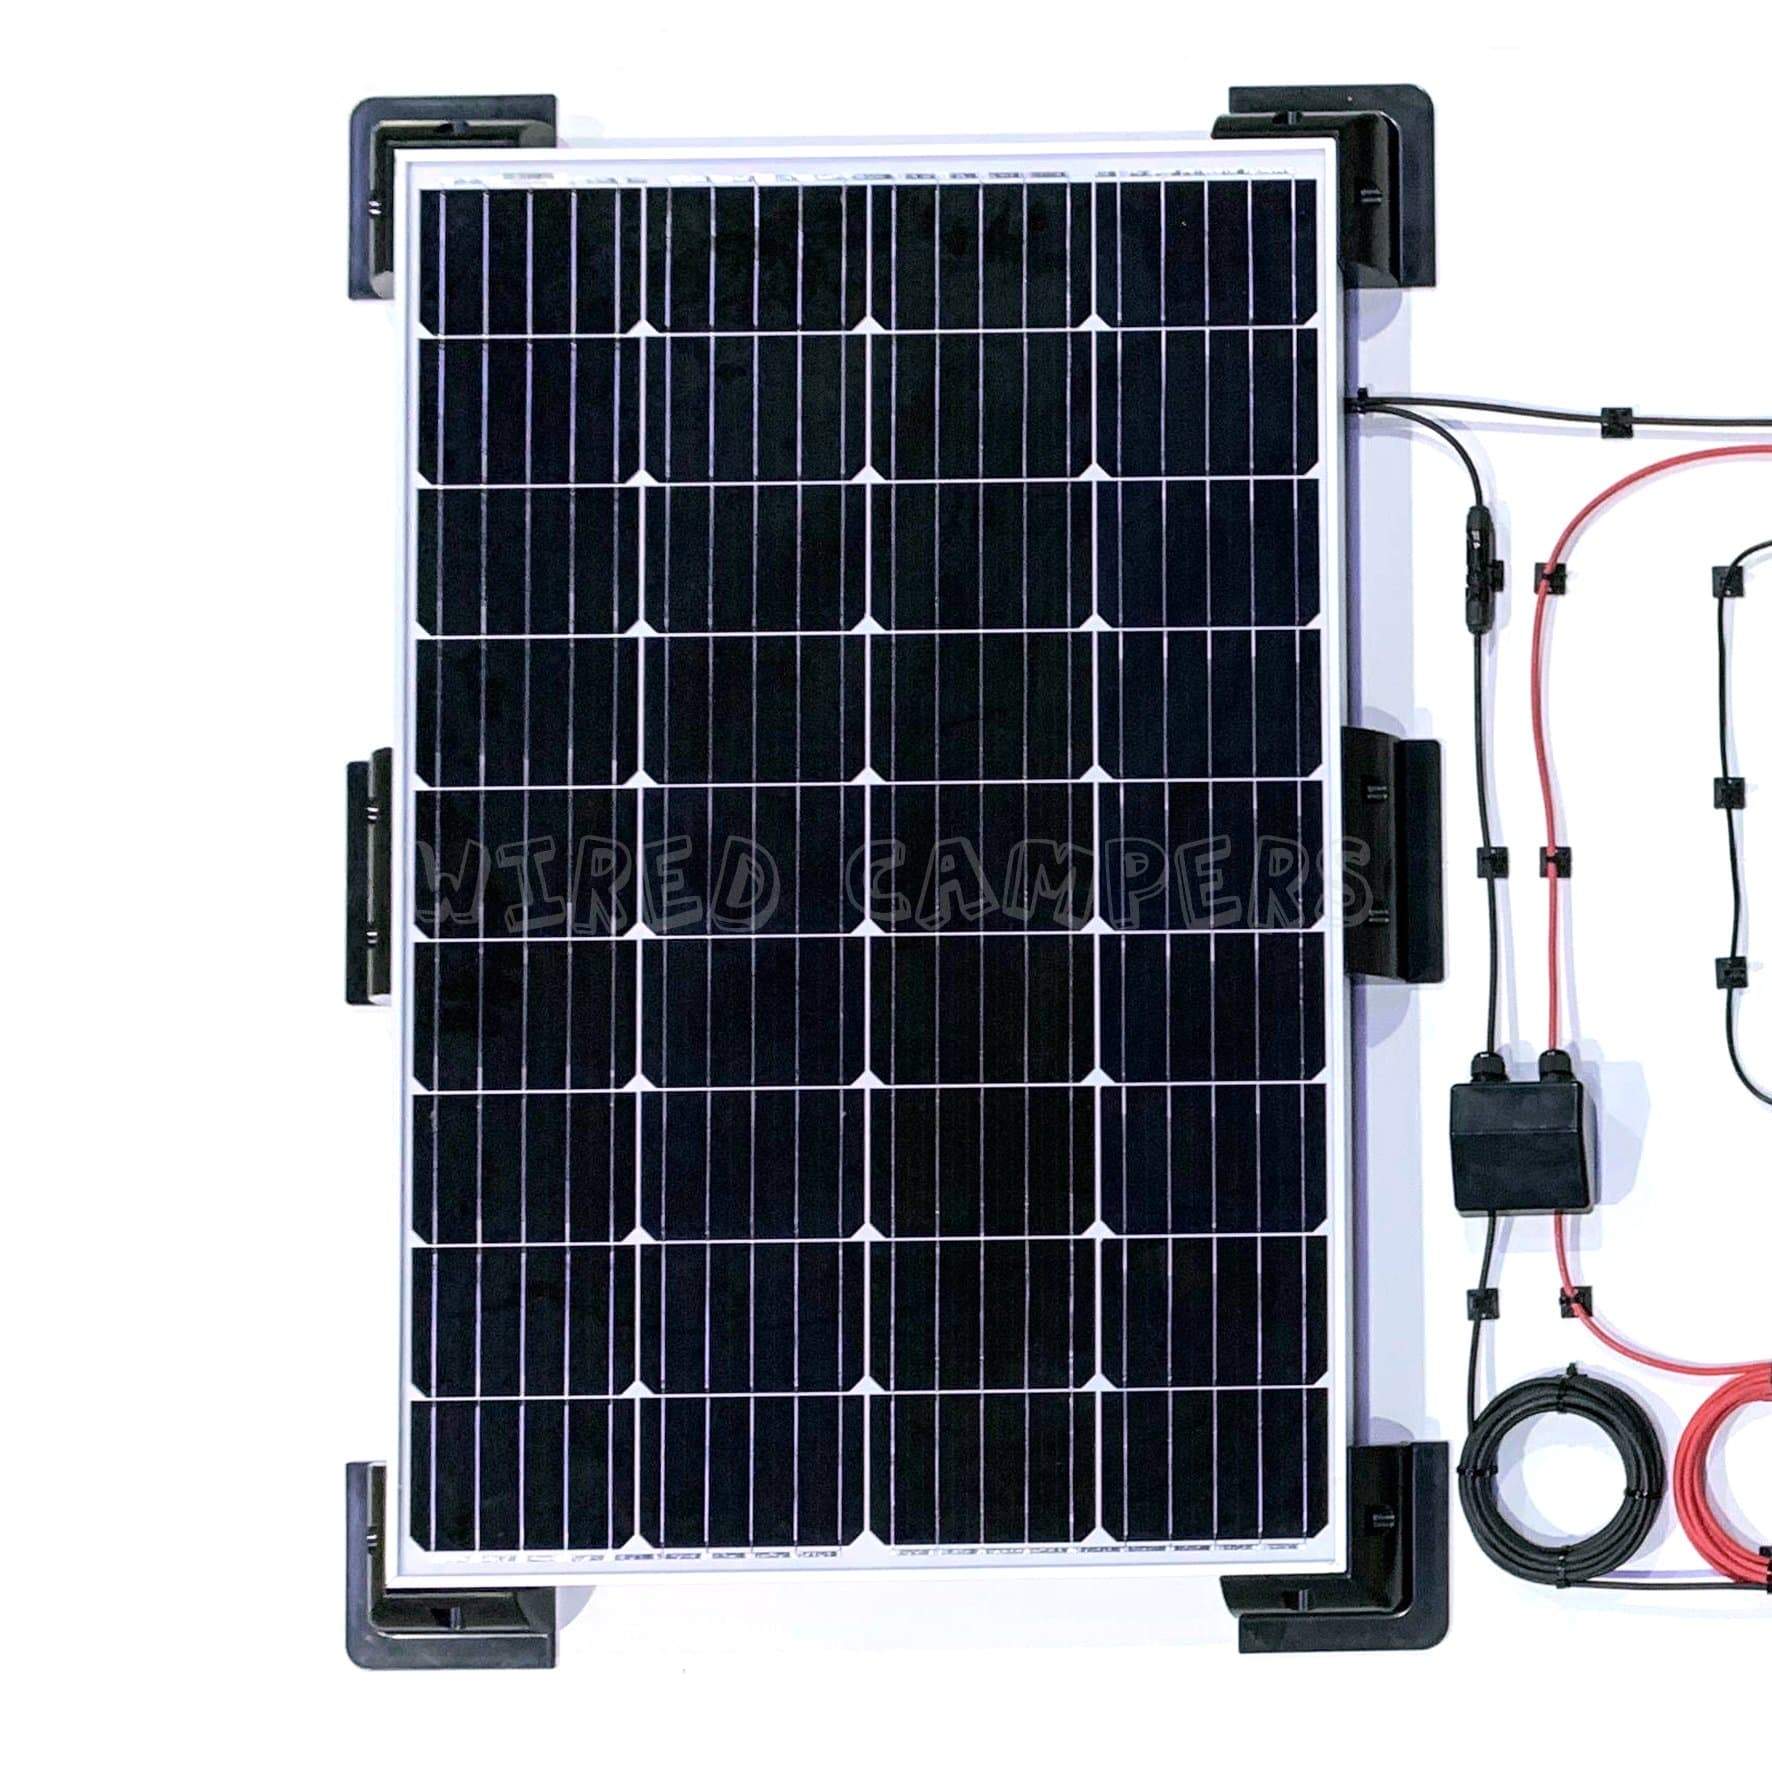 Wired Campers 30A EPEVER MPPT & Victron Energy 280W BlueSolar Mono Solar Panel Camper Van Kit